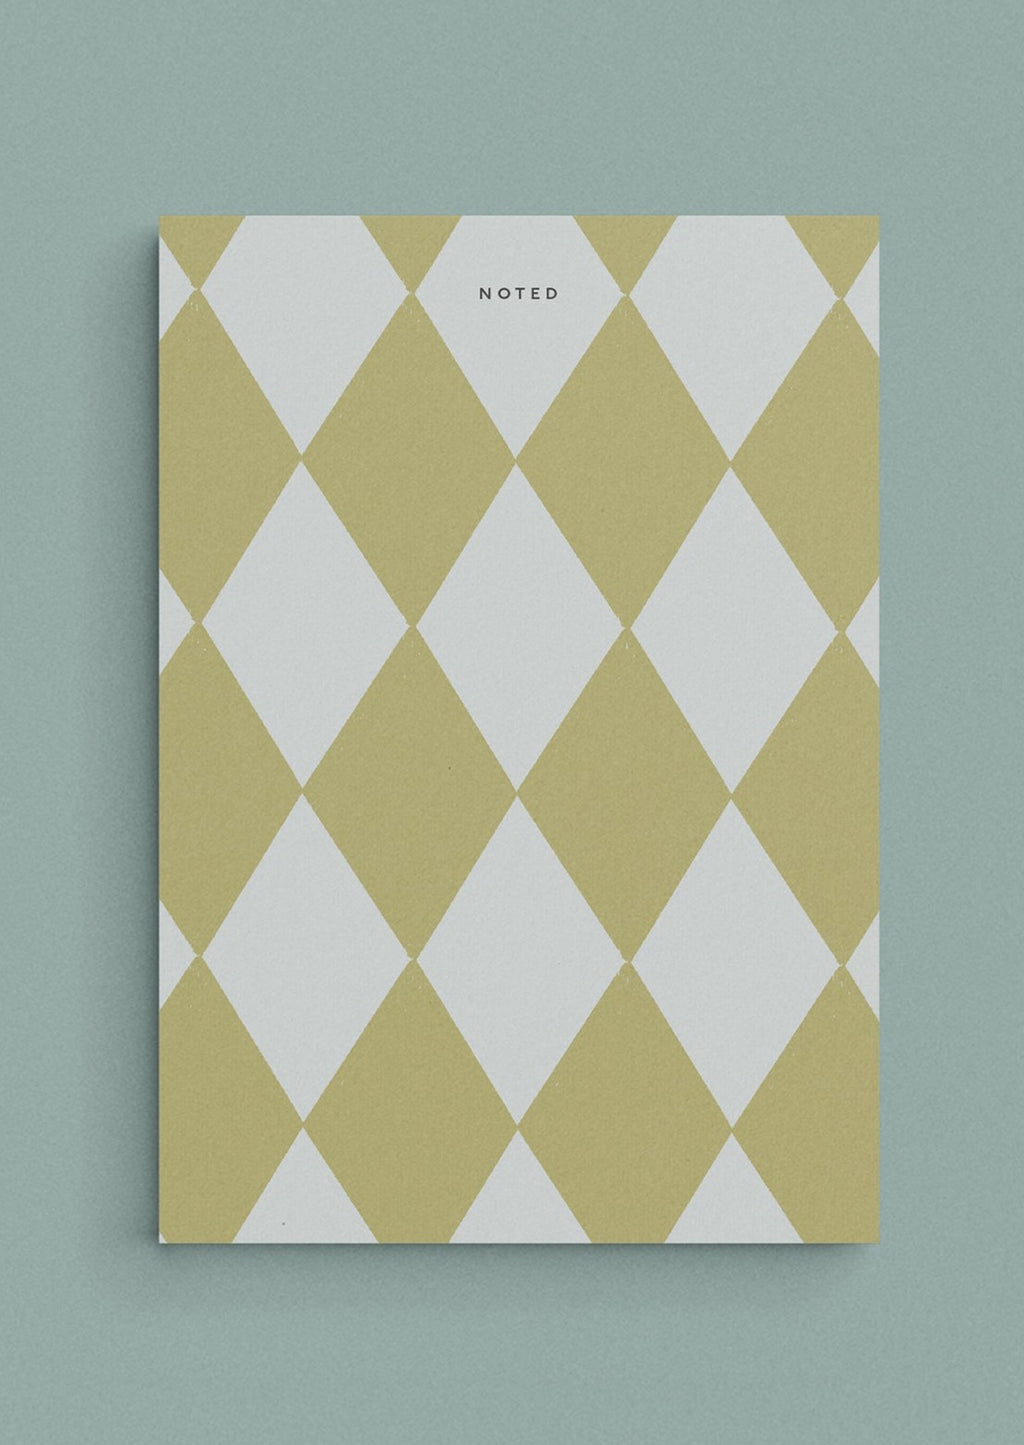 Cloud / Sage Multi: A diamond print notepad in green and light blue reading "NOTED" at the top.